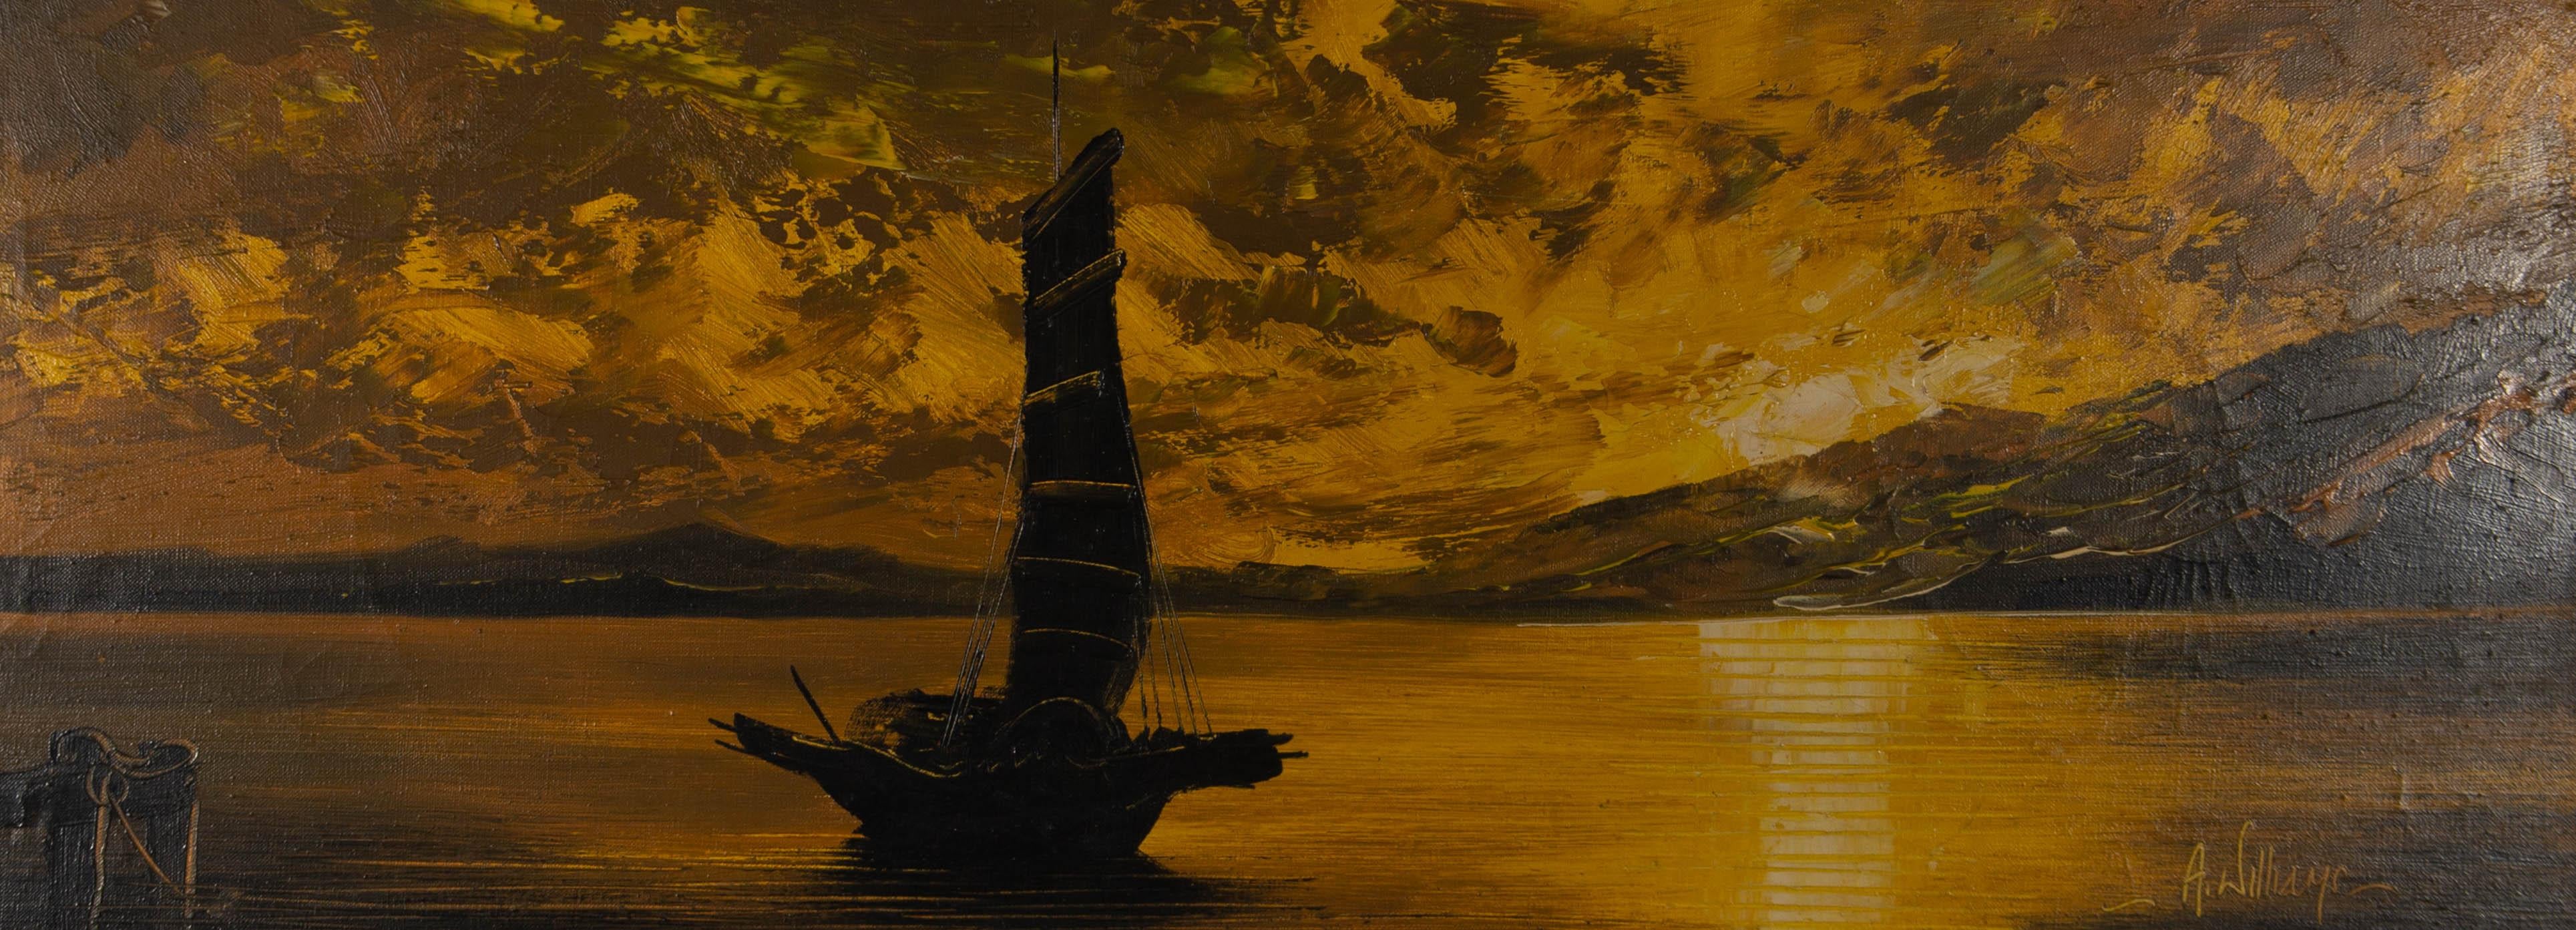 chinese junk boat paintings